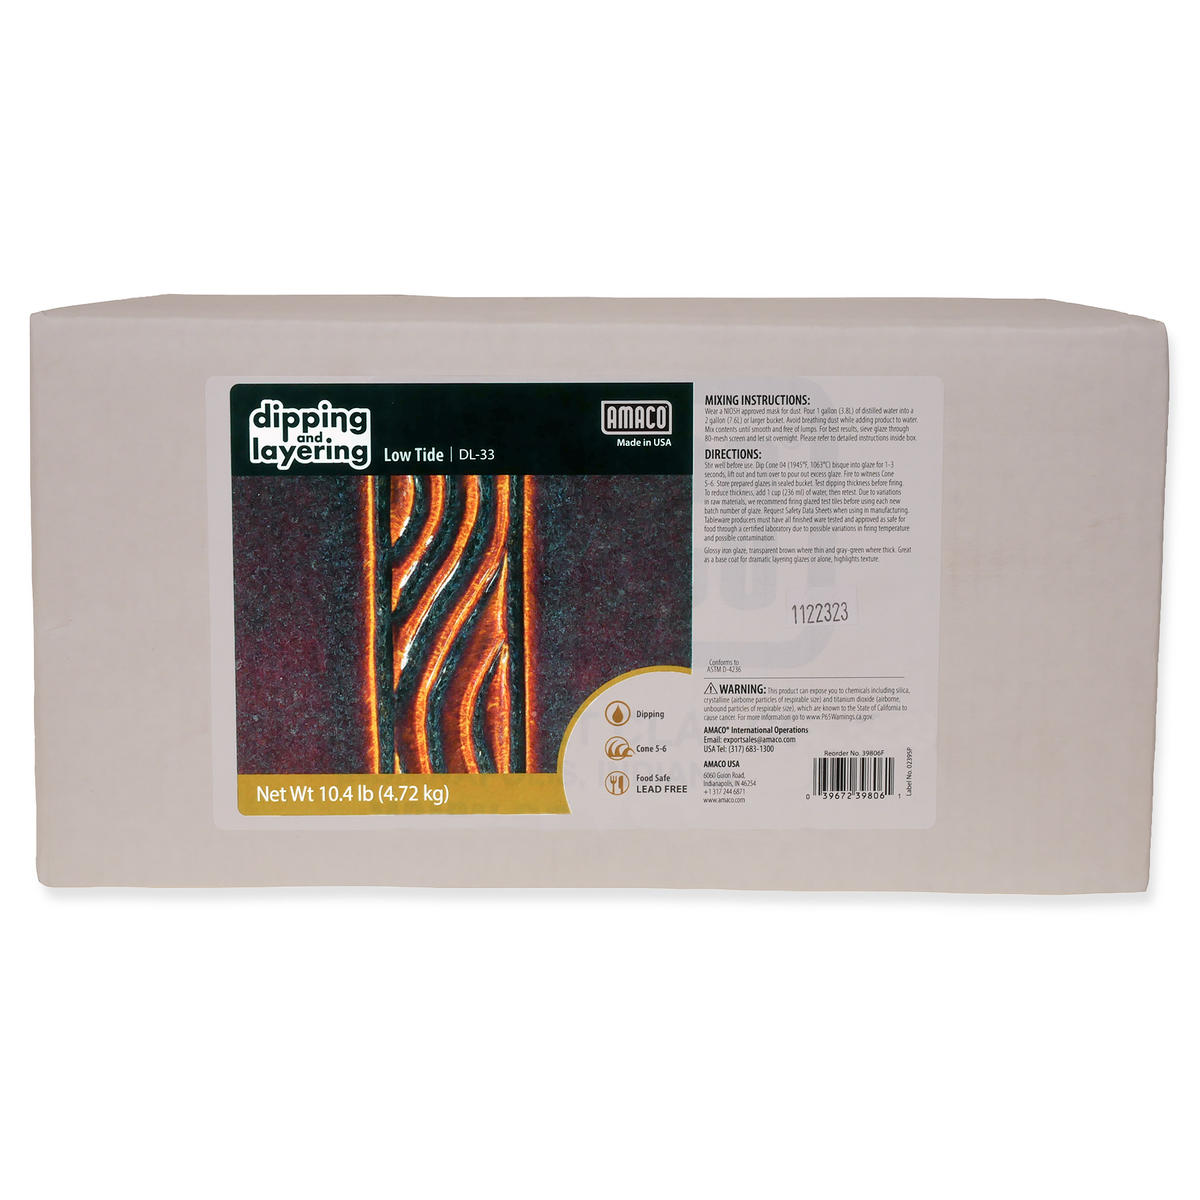 Amaco Dipping & Layering DL33 Low Tide Glaze, 10 lb Dry